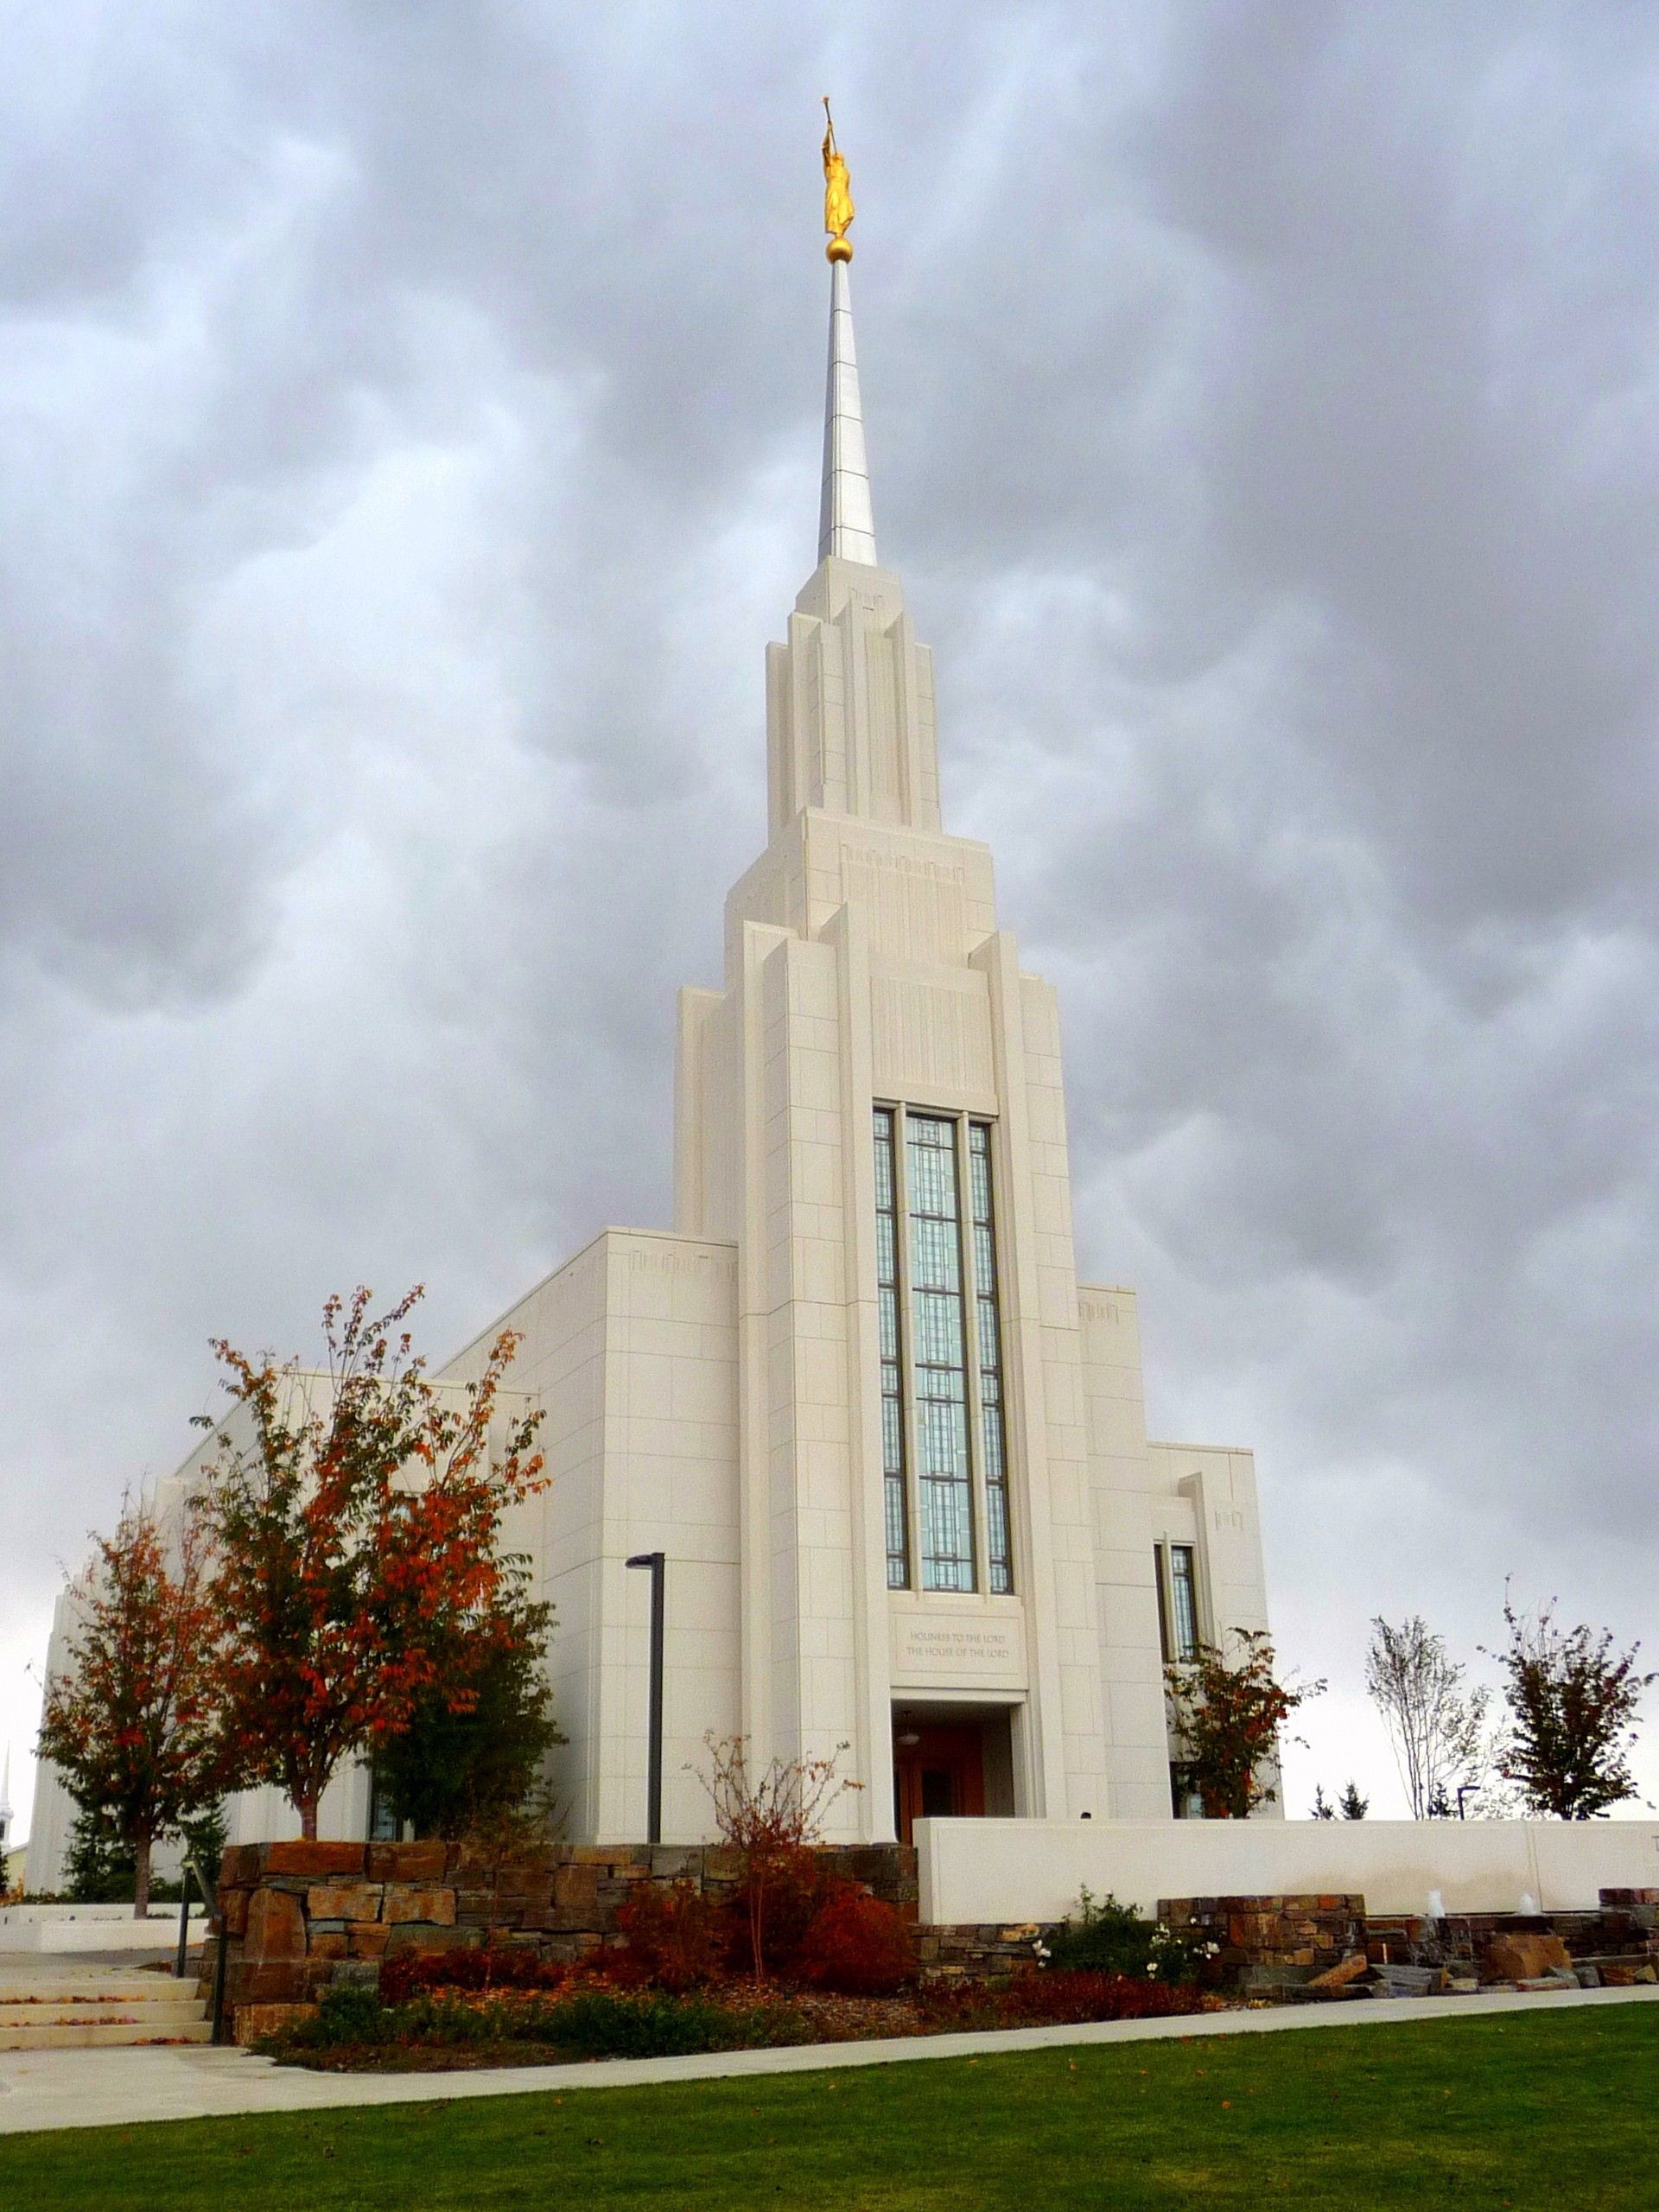 The Twin Falls Idaho Temple, including the entrance and scenery.